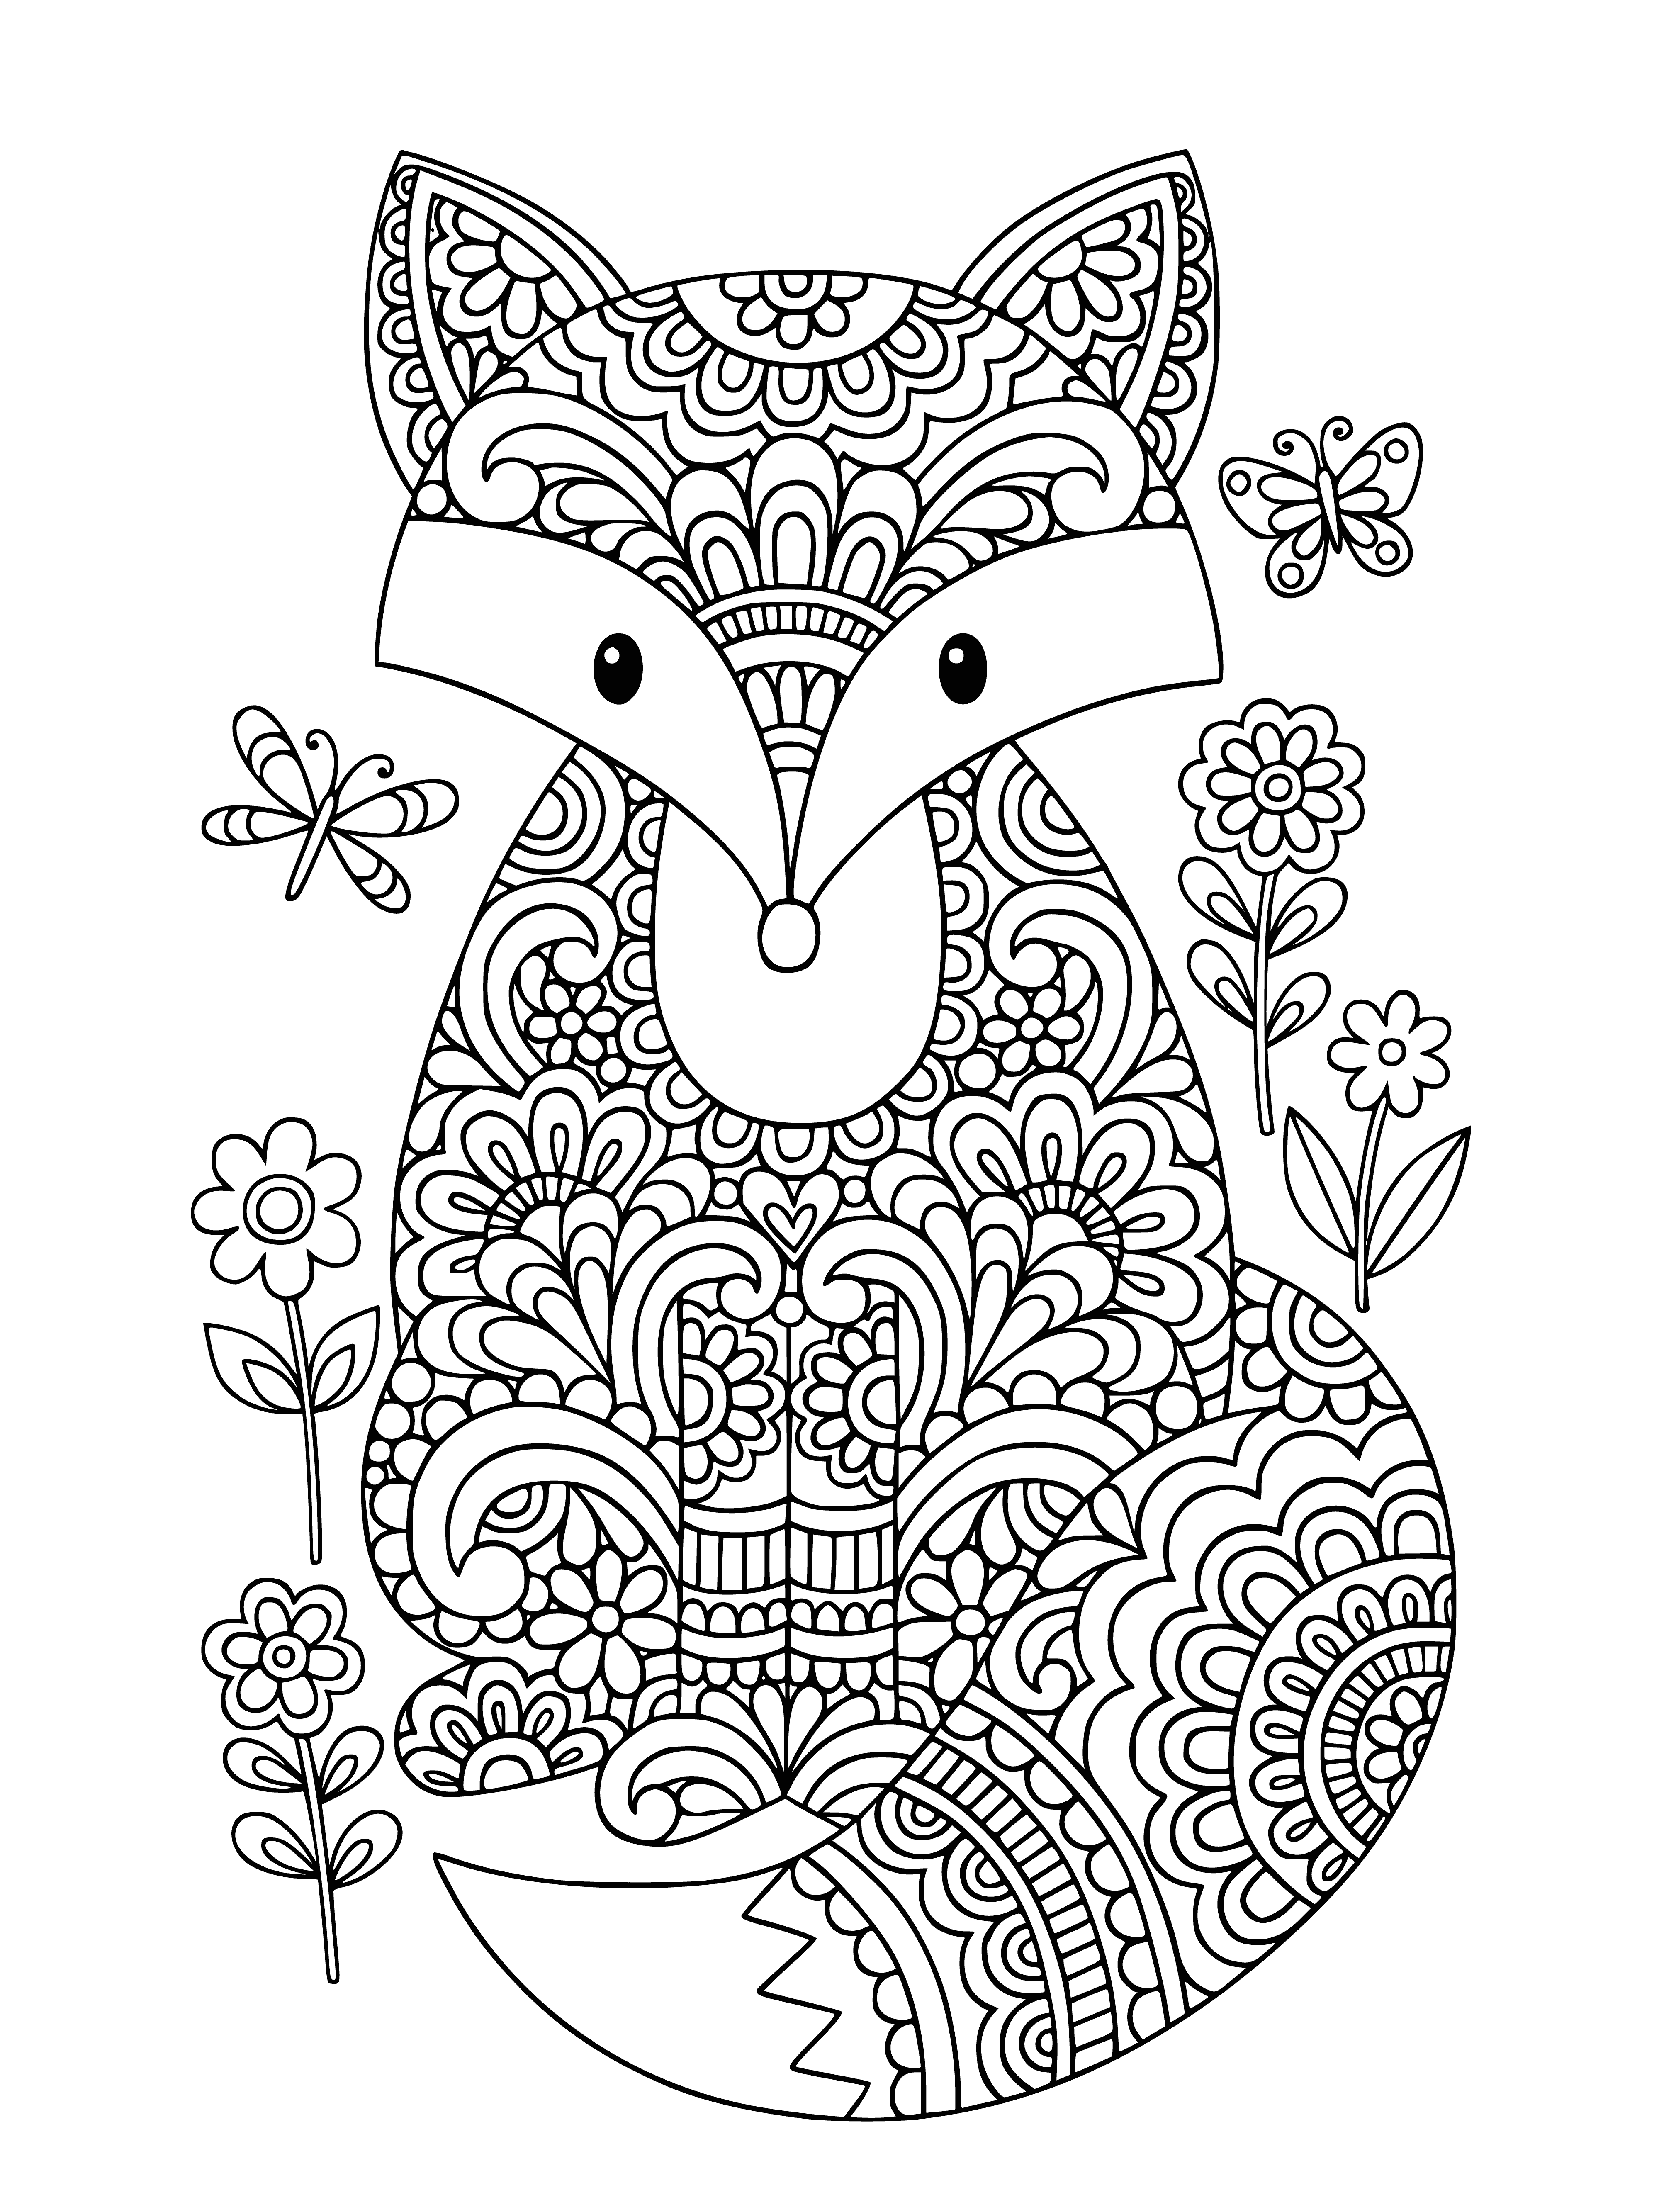 coloring page: #foxes #coloringPages

Two foxes in running & standing poses, with sharp teeth & pointy ears - lovely coloring pages to enjoy! #foxes #coloringPages